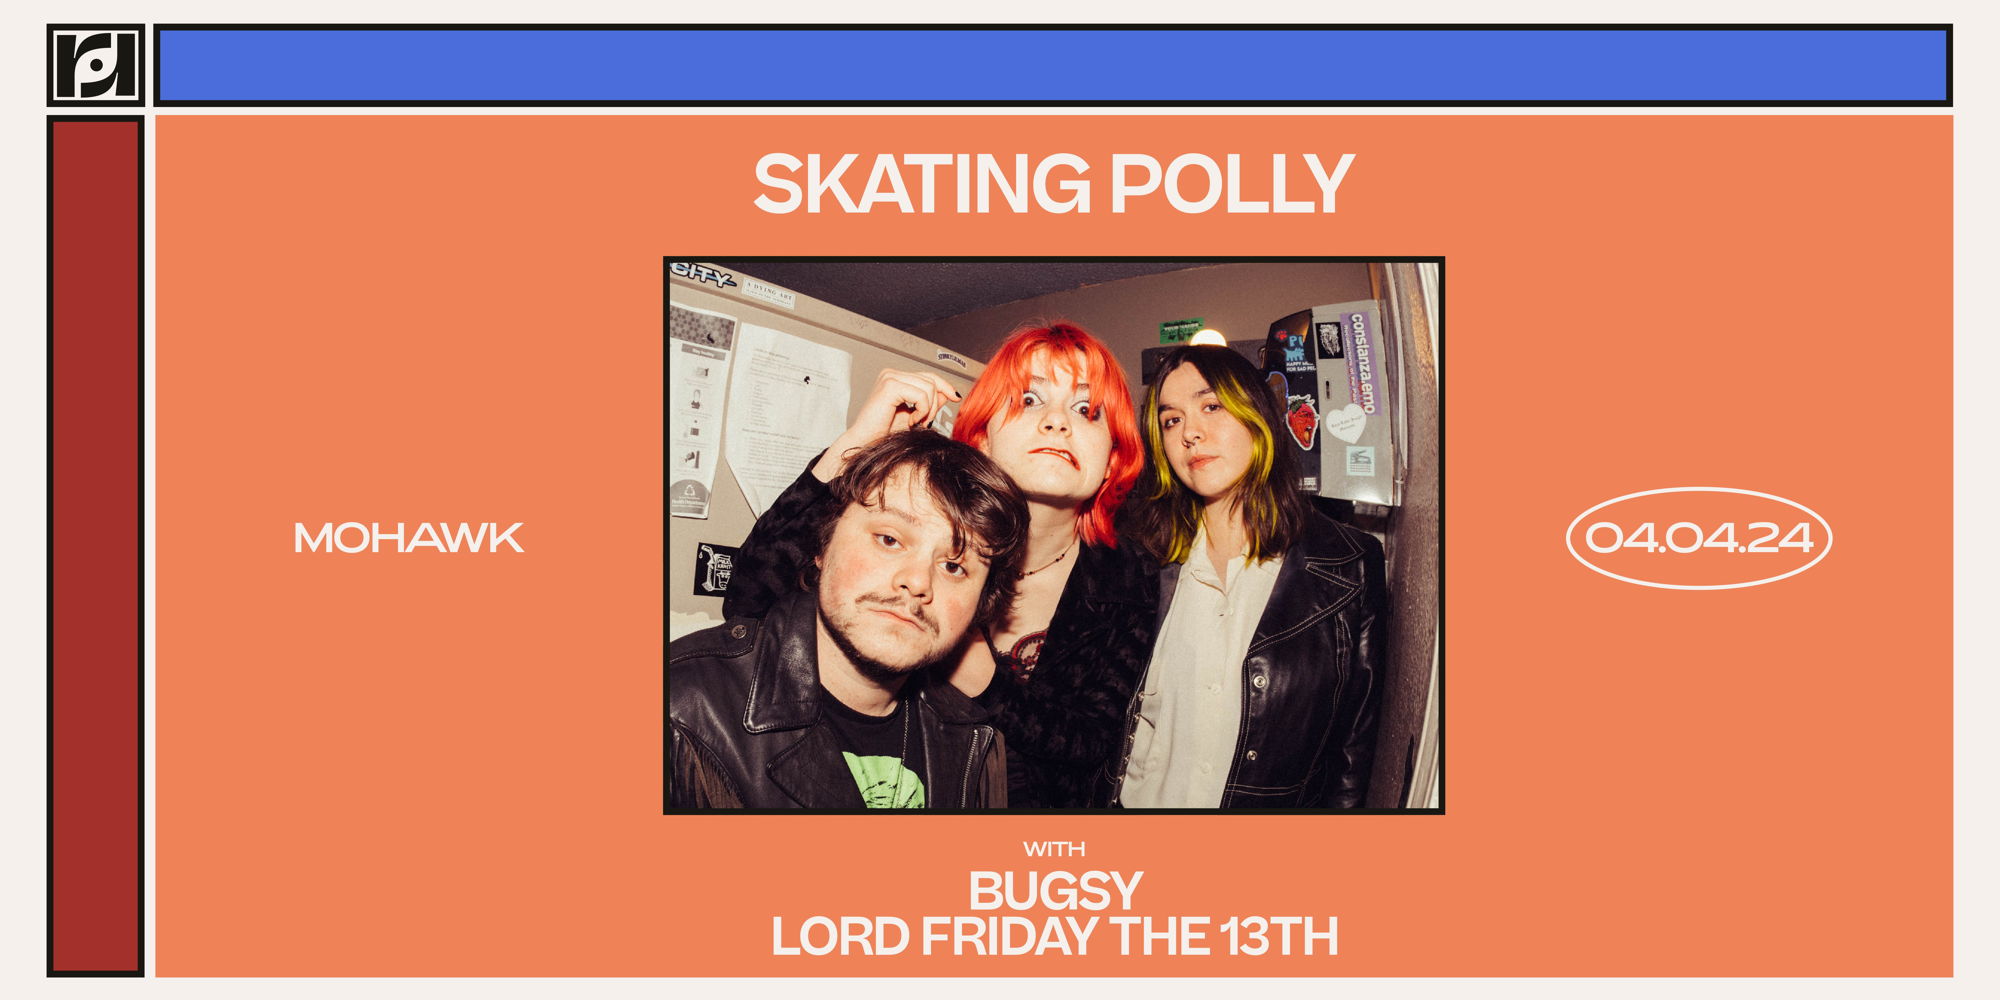 Resound Presents: Skating Polly w/ bugsy, Lord Friday the 13th at Mohawk promotional image